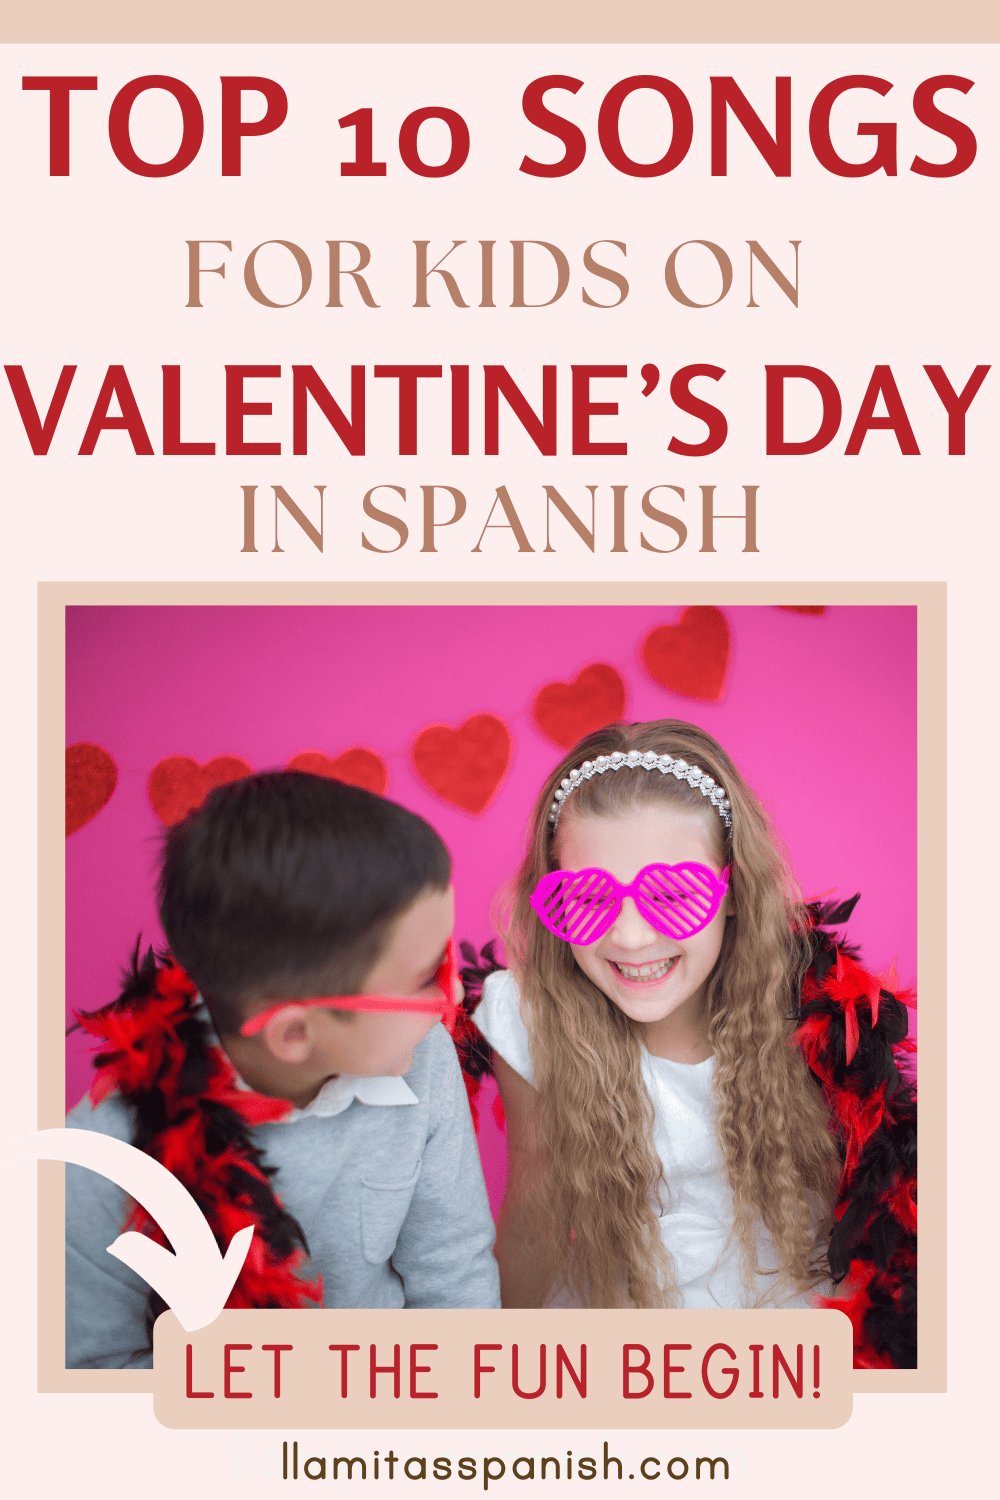 Kids with Valentine's heart glasses singing songs